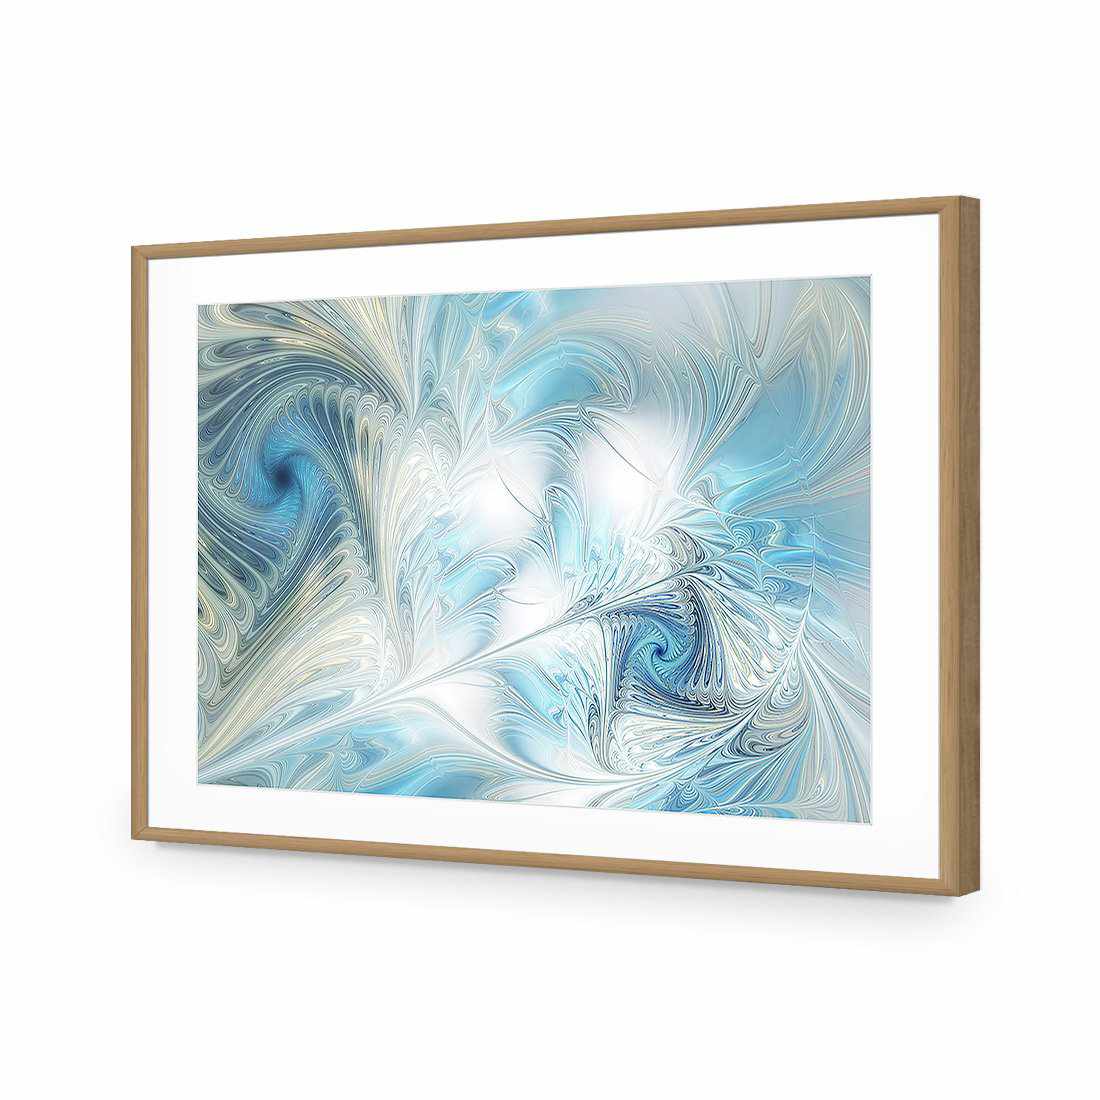 Travesty-Acrylic-Wall Art Design-With Border-Acrylic - Oak Frame-45x30cm-Wall Art Designs